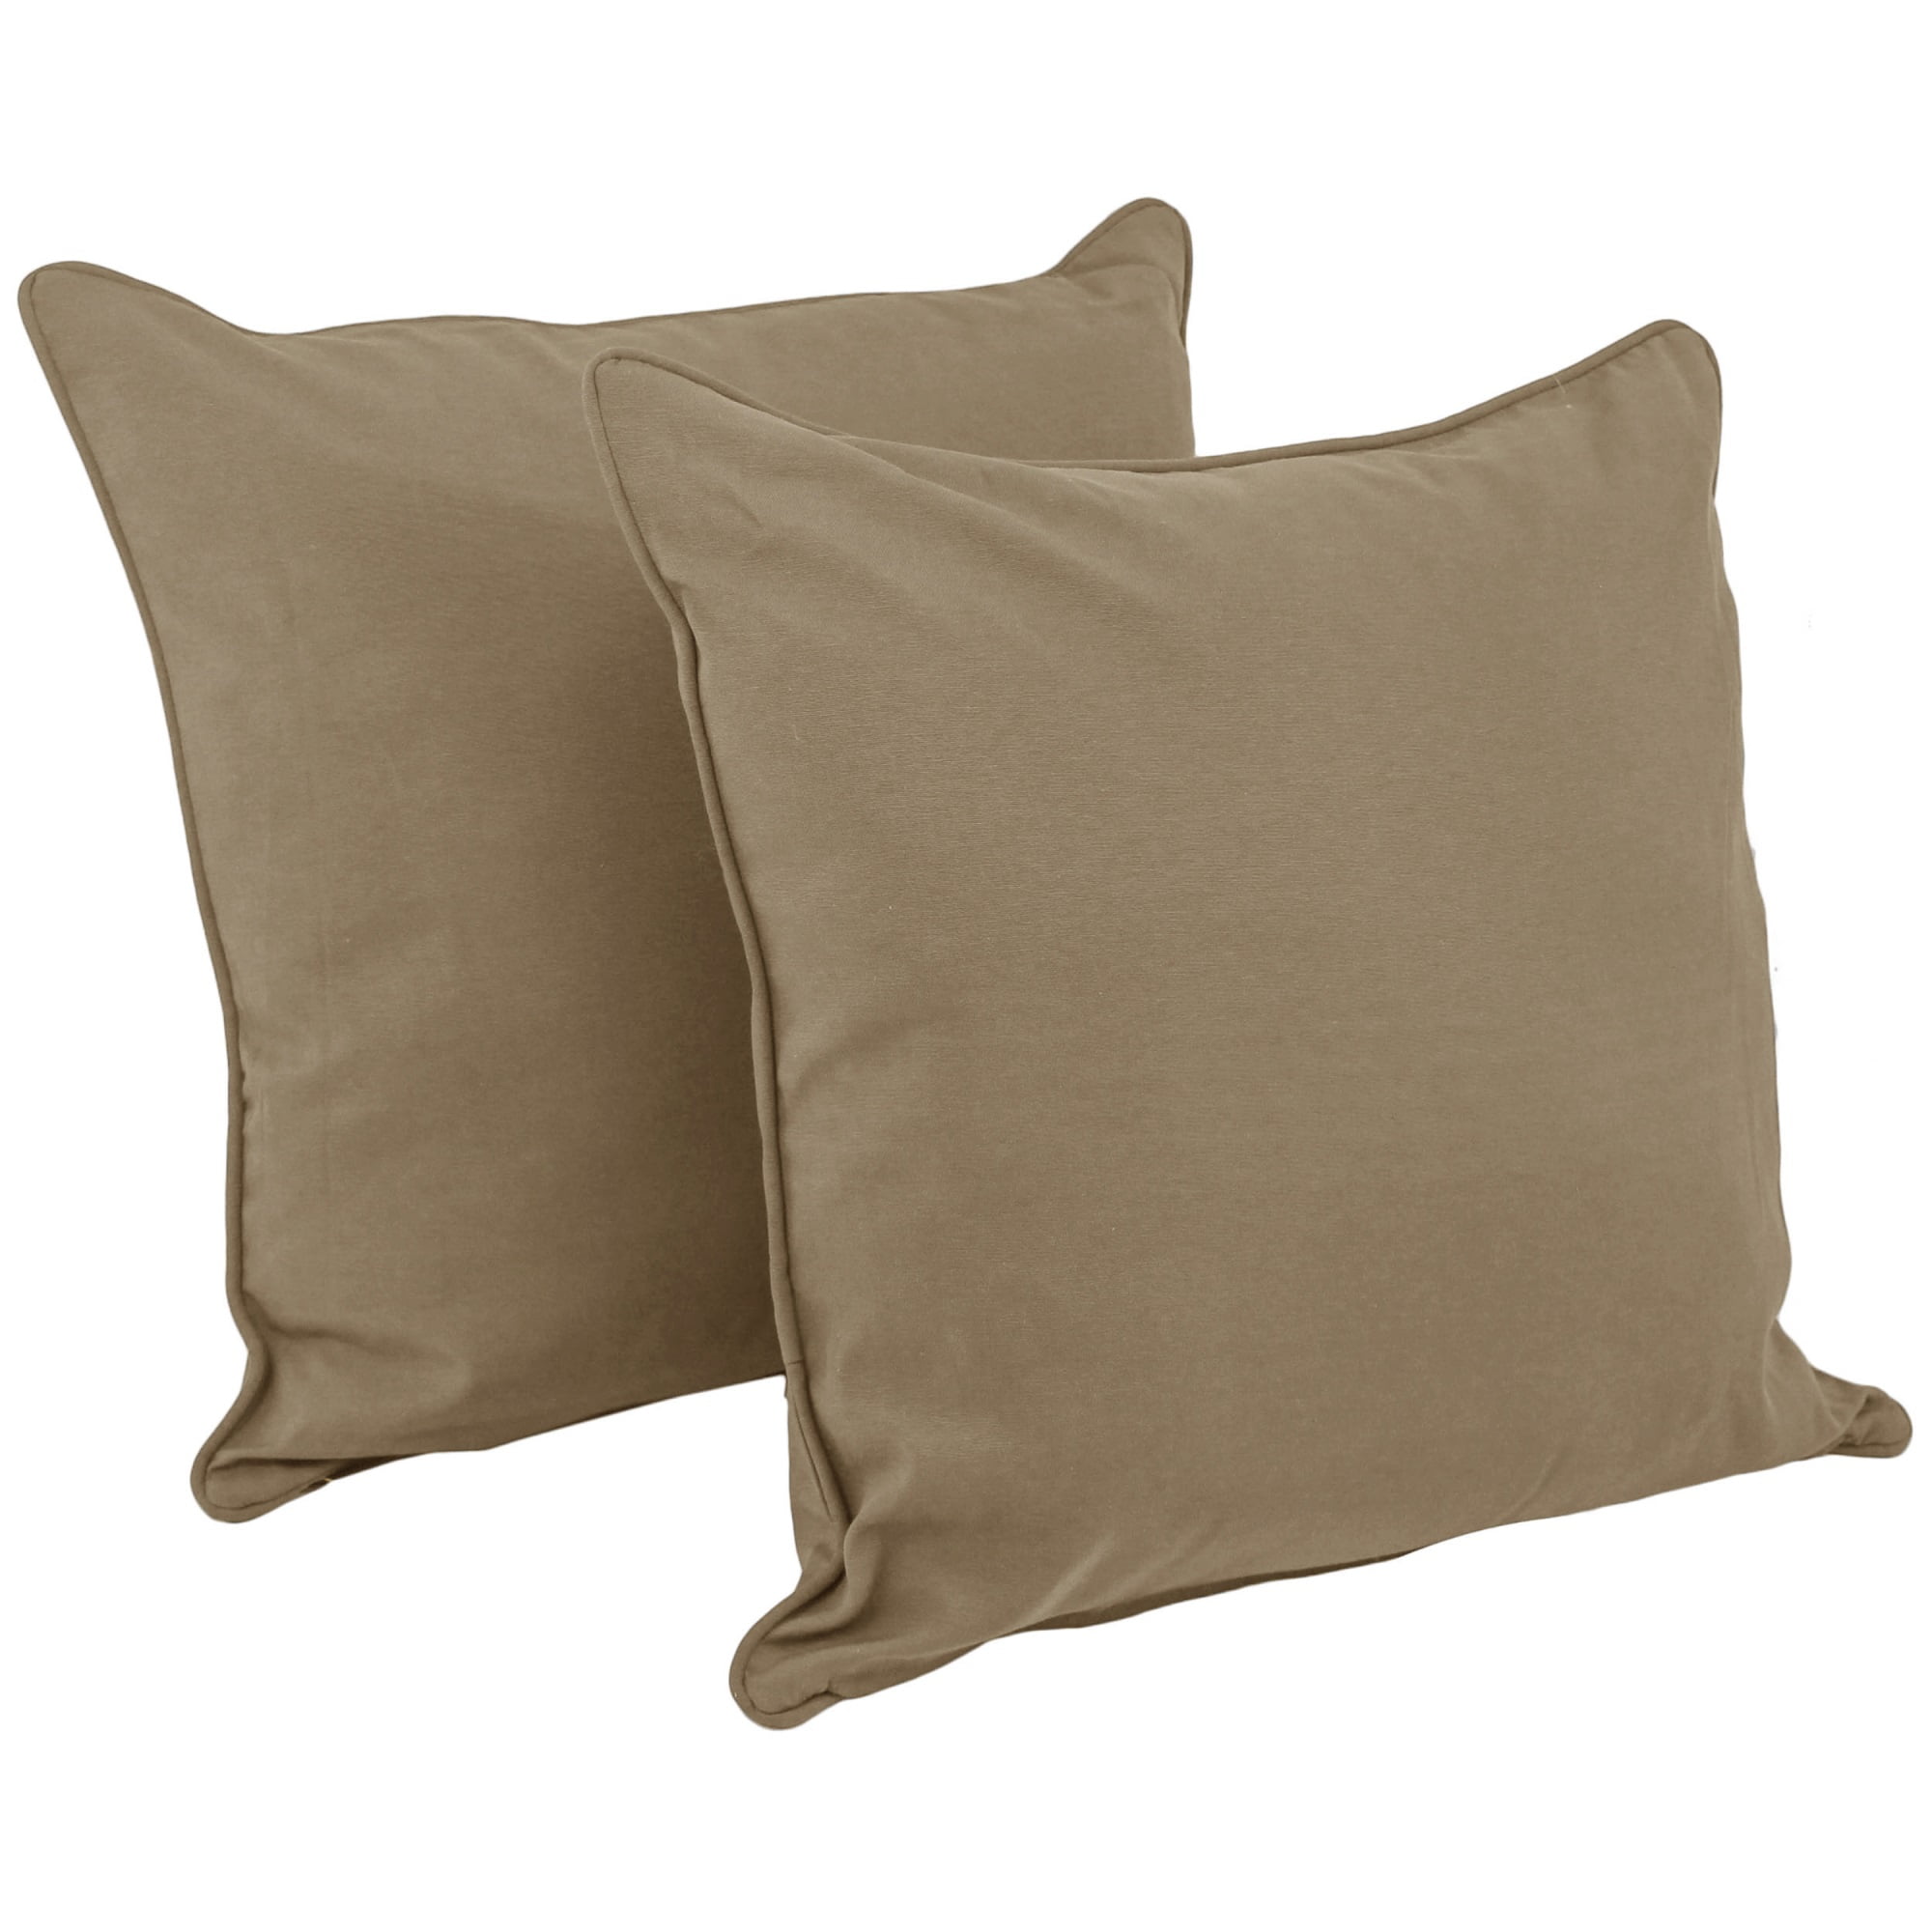 Picture of Blazing Needles 9813-CD-S2-TW-TF 25 in. Double-Corded Solid Twill Square Floor Pillows with Inserts, Toffee - Set of 2